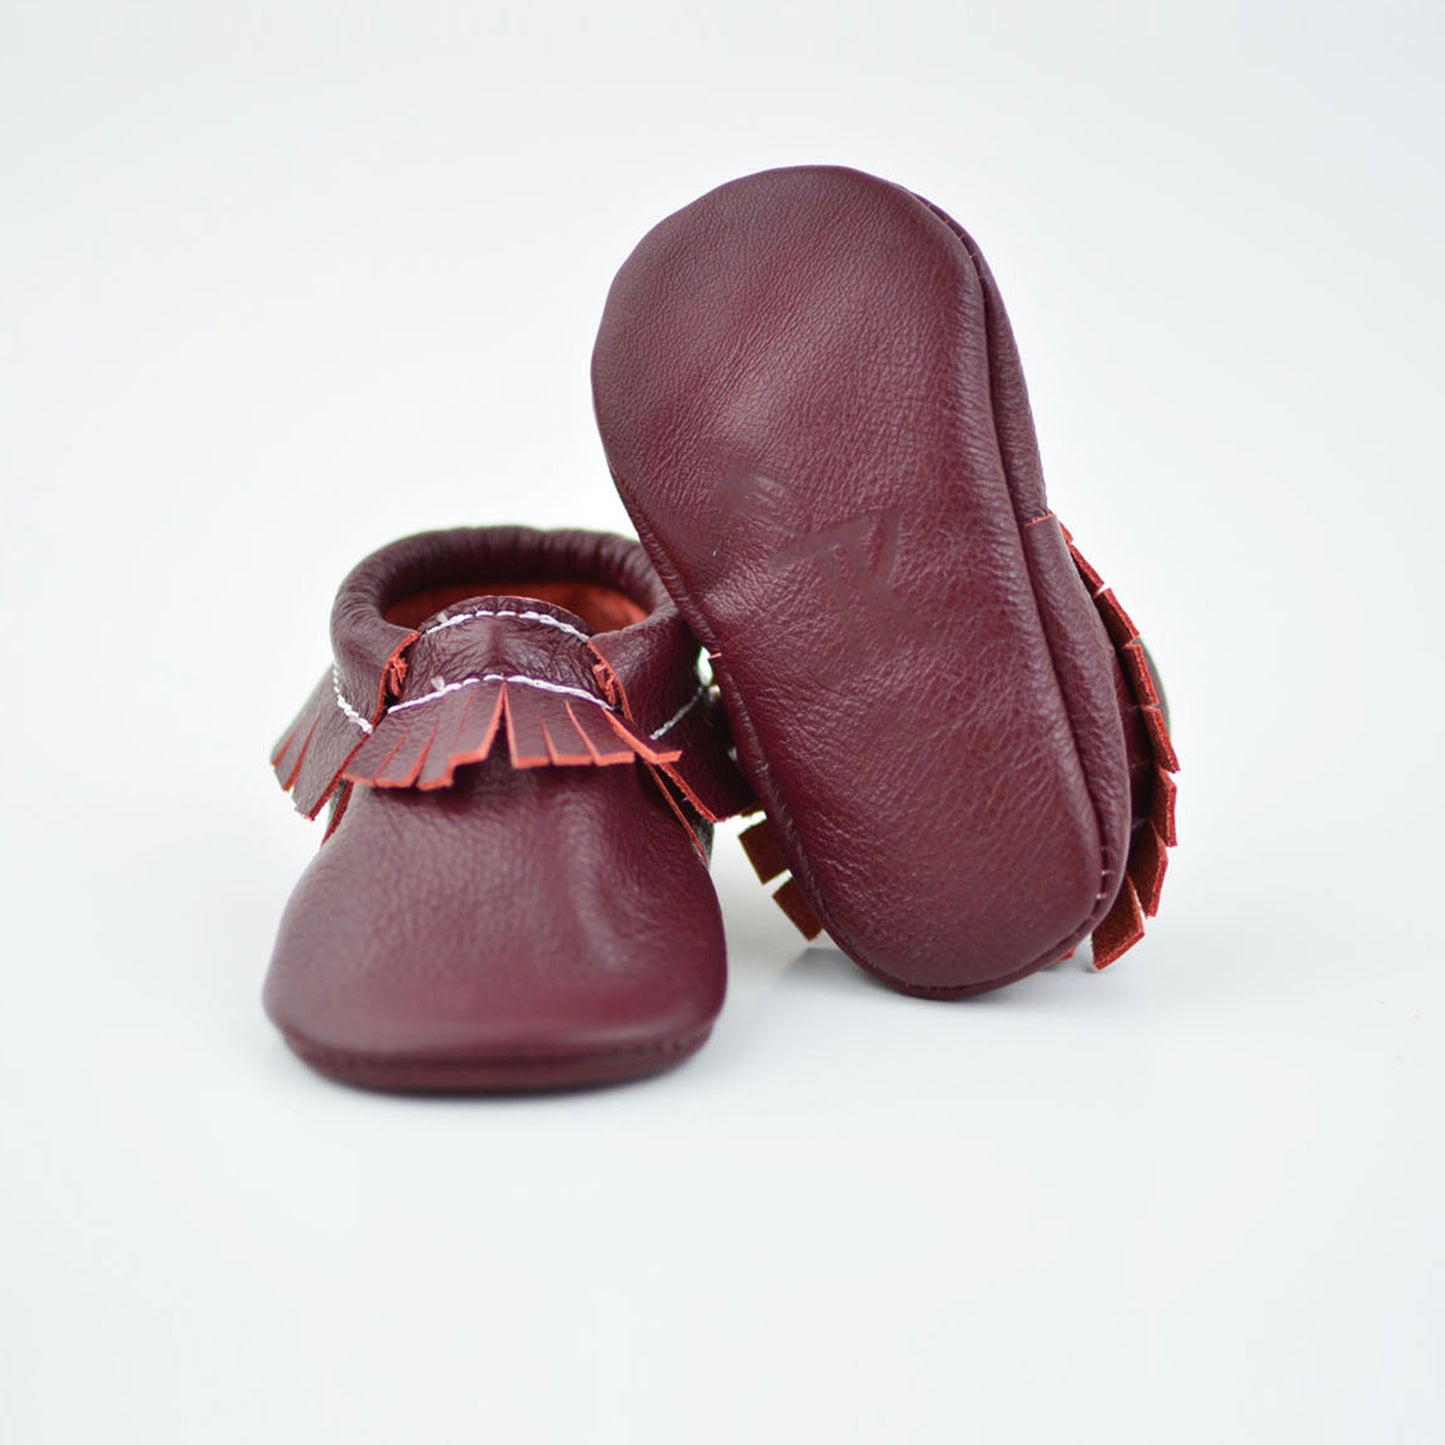 RTS Burgundy Moccasins With Same Leather Soles - Size 3 (12-18M)(5")